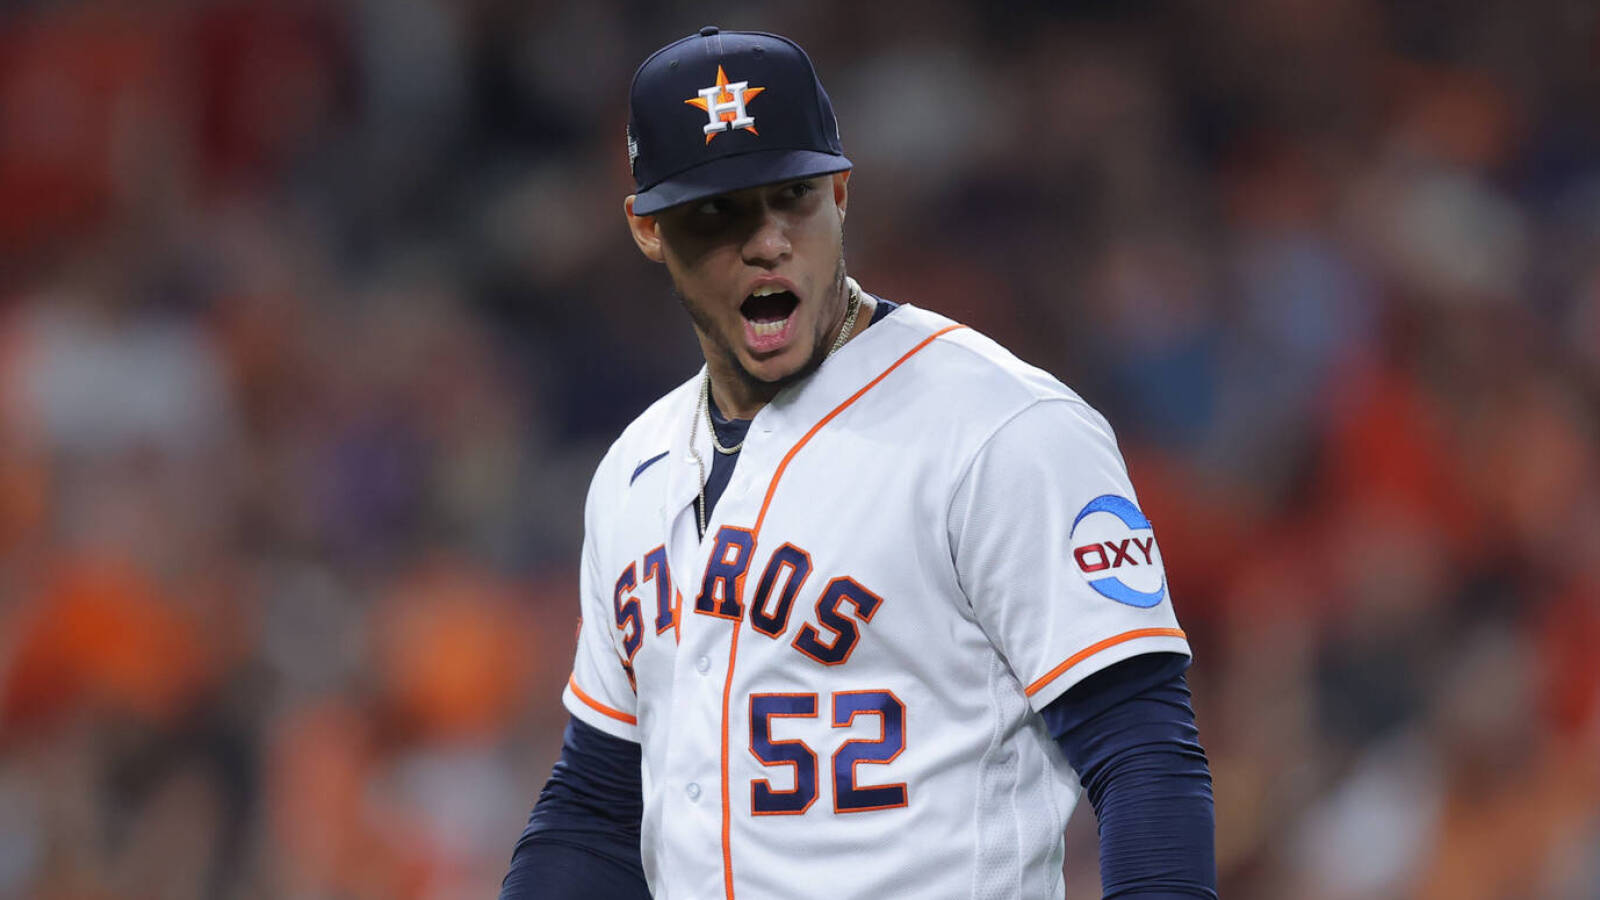 MLB makes decision on key Astros reliever's suspension